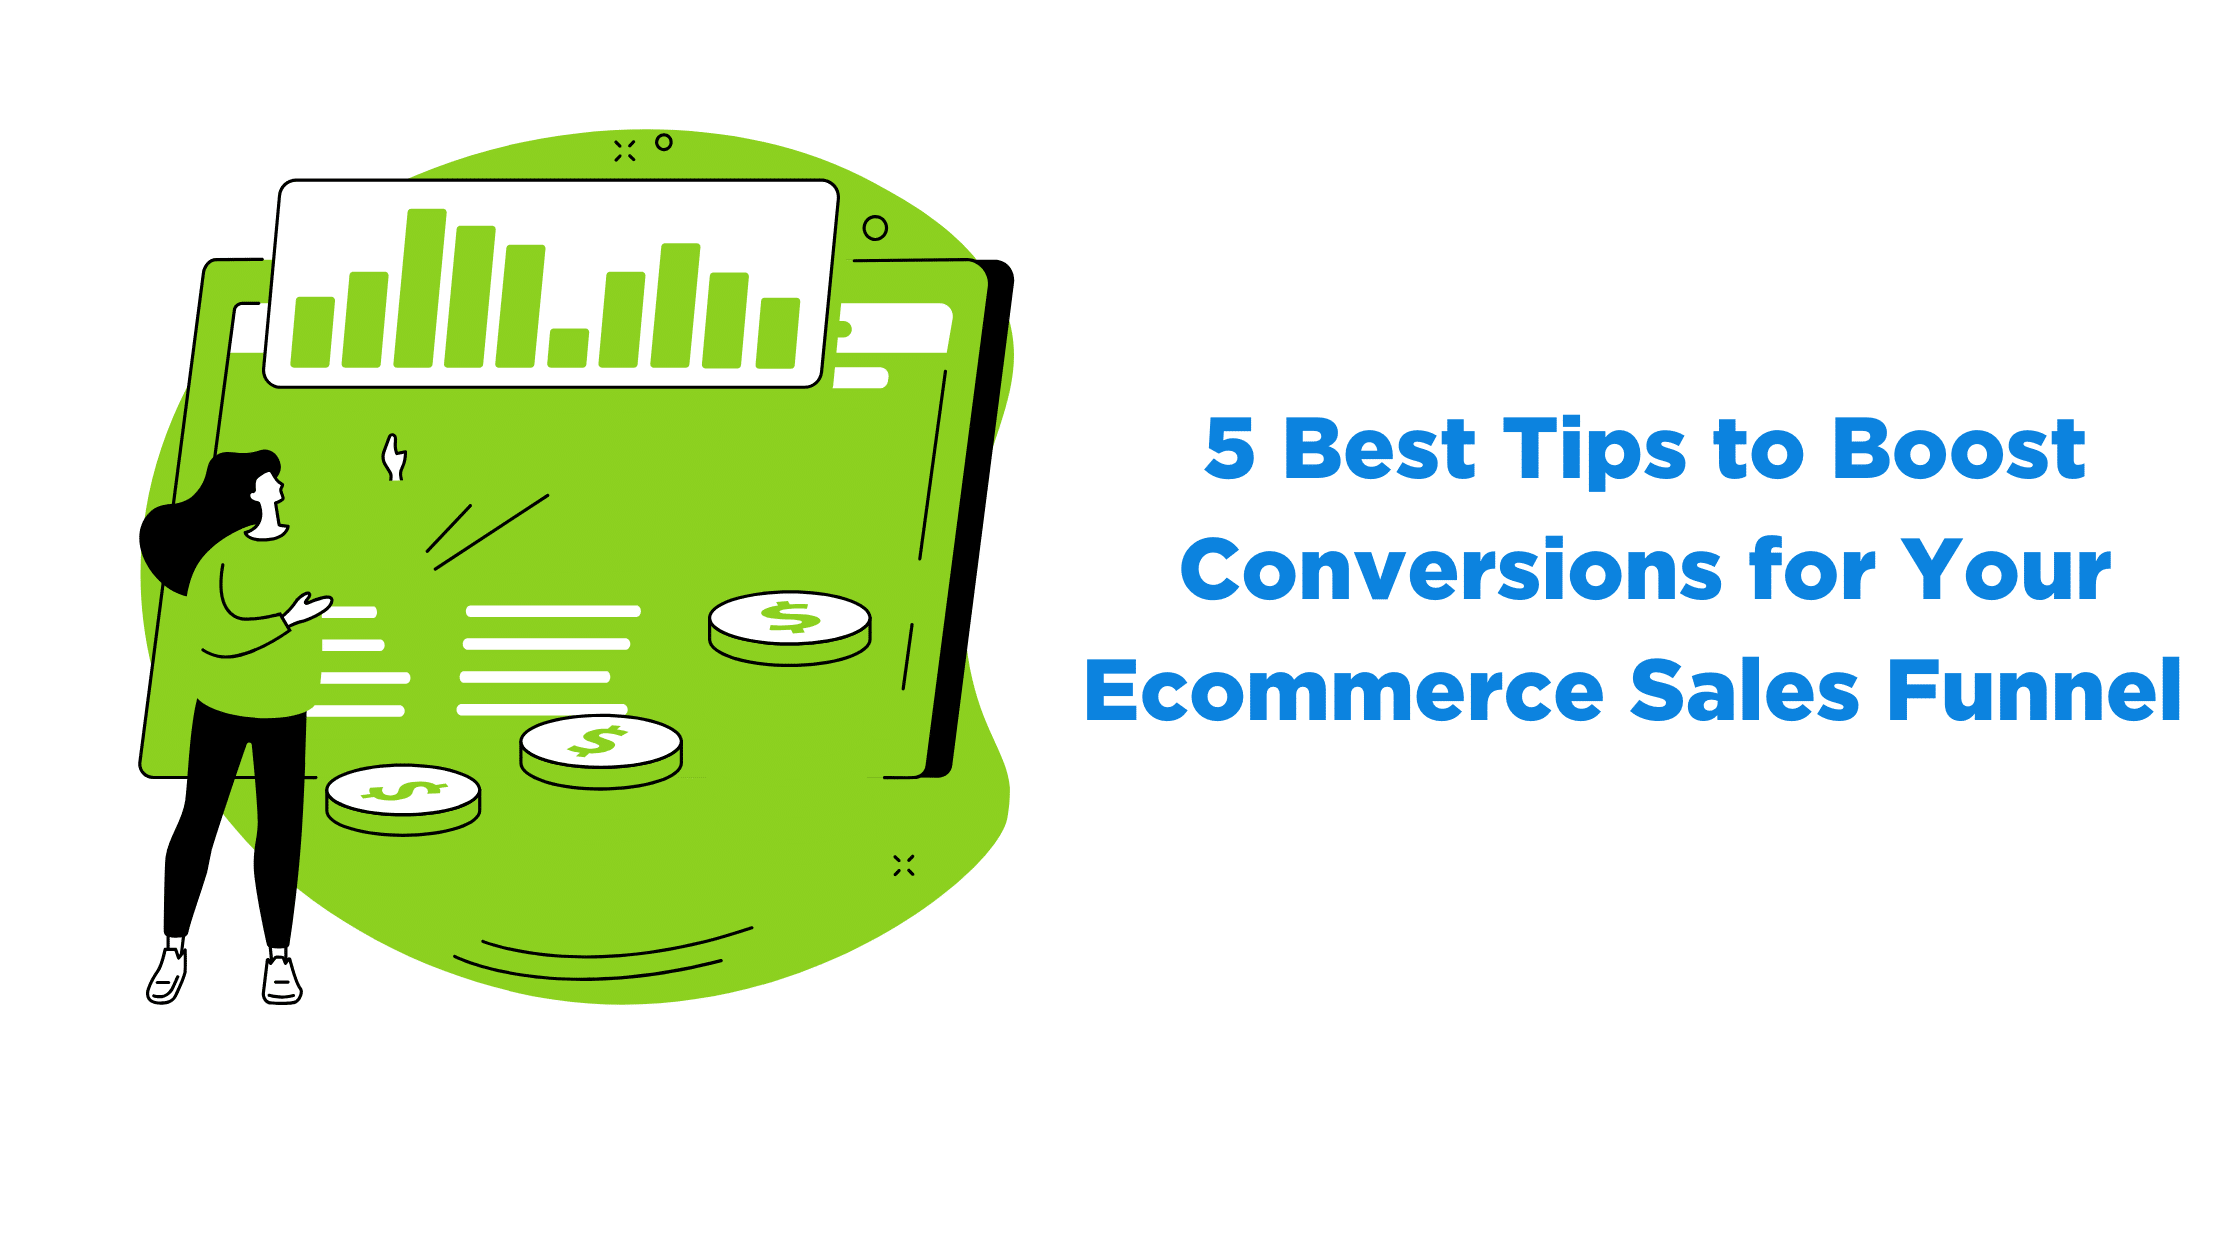 5 Best Tips To Boost Conversions For Your Ecommerce Sales Funnel